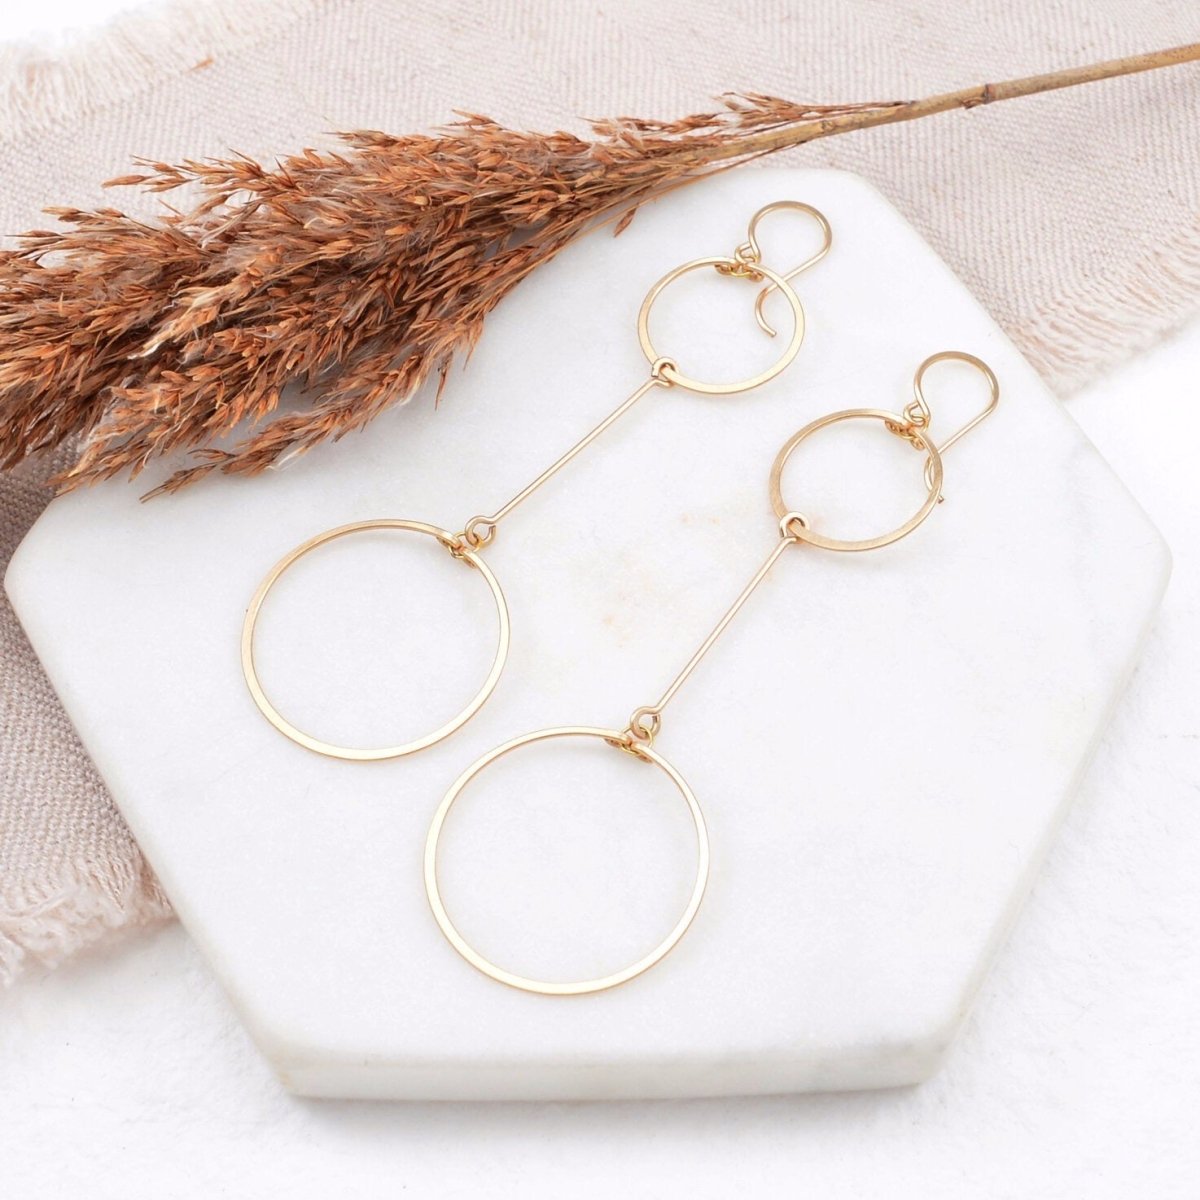 Two hand forged and hammered gold fill circles come together with a gold bar in between. Designed and handmade by Amy Olson in Portland, Oregon.